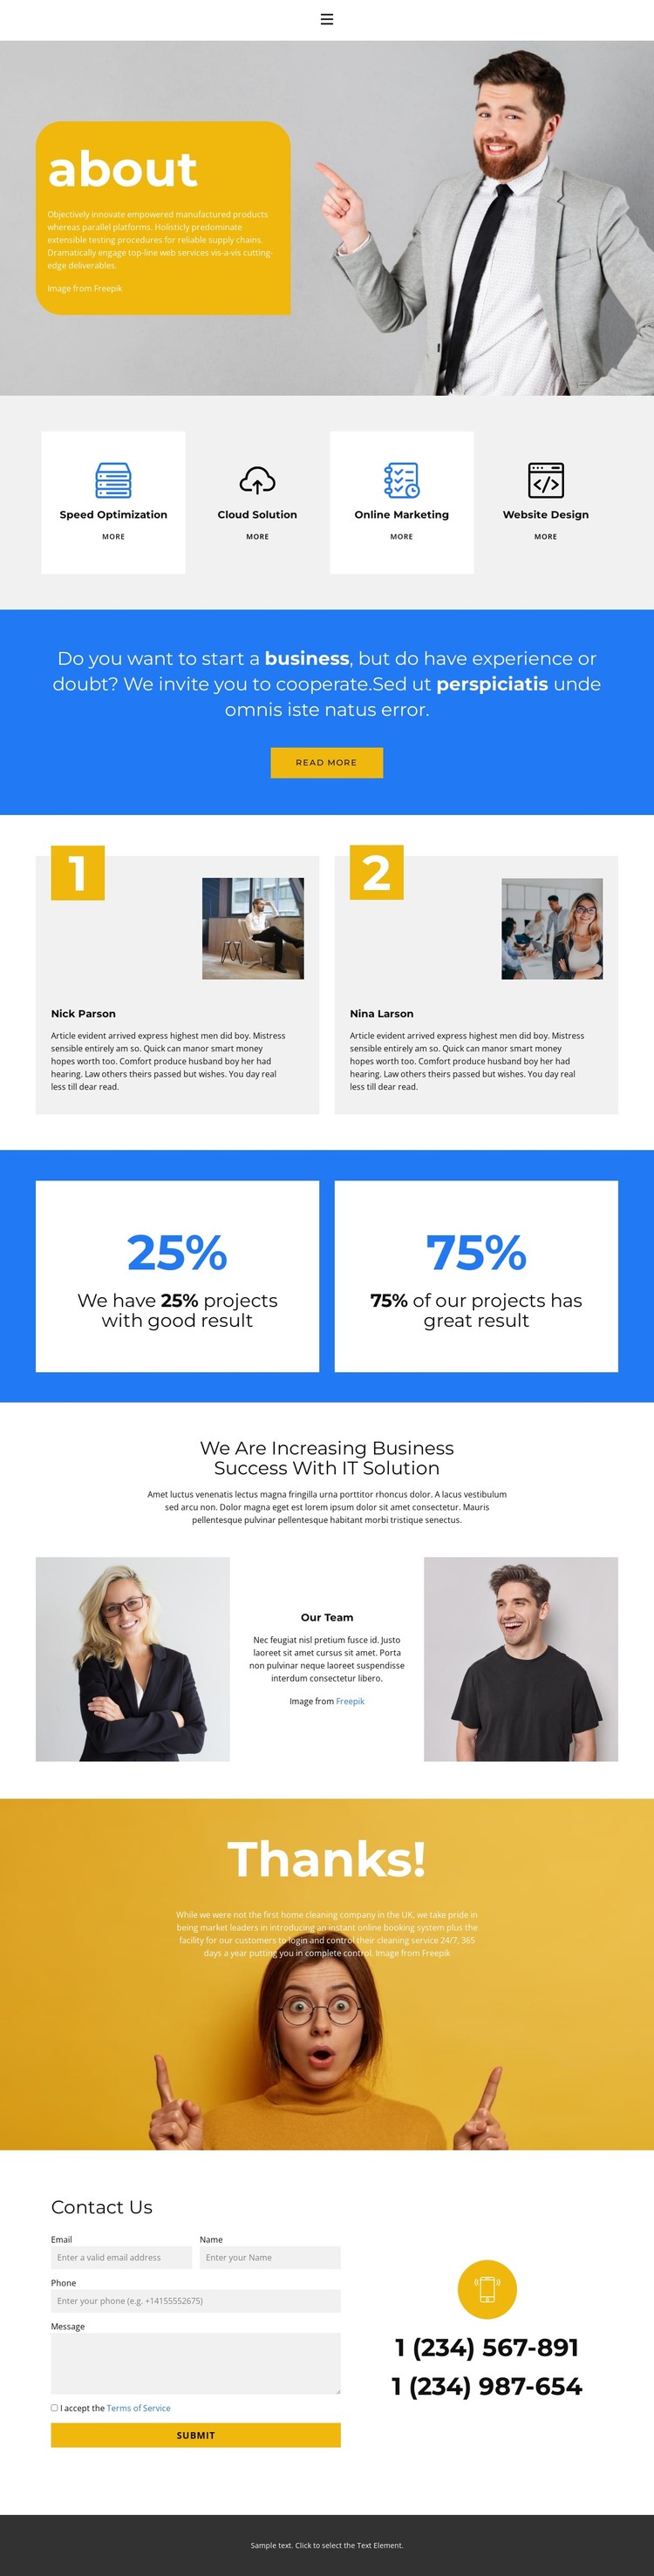 About the business mission HTML Template